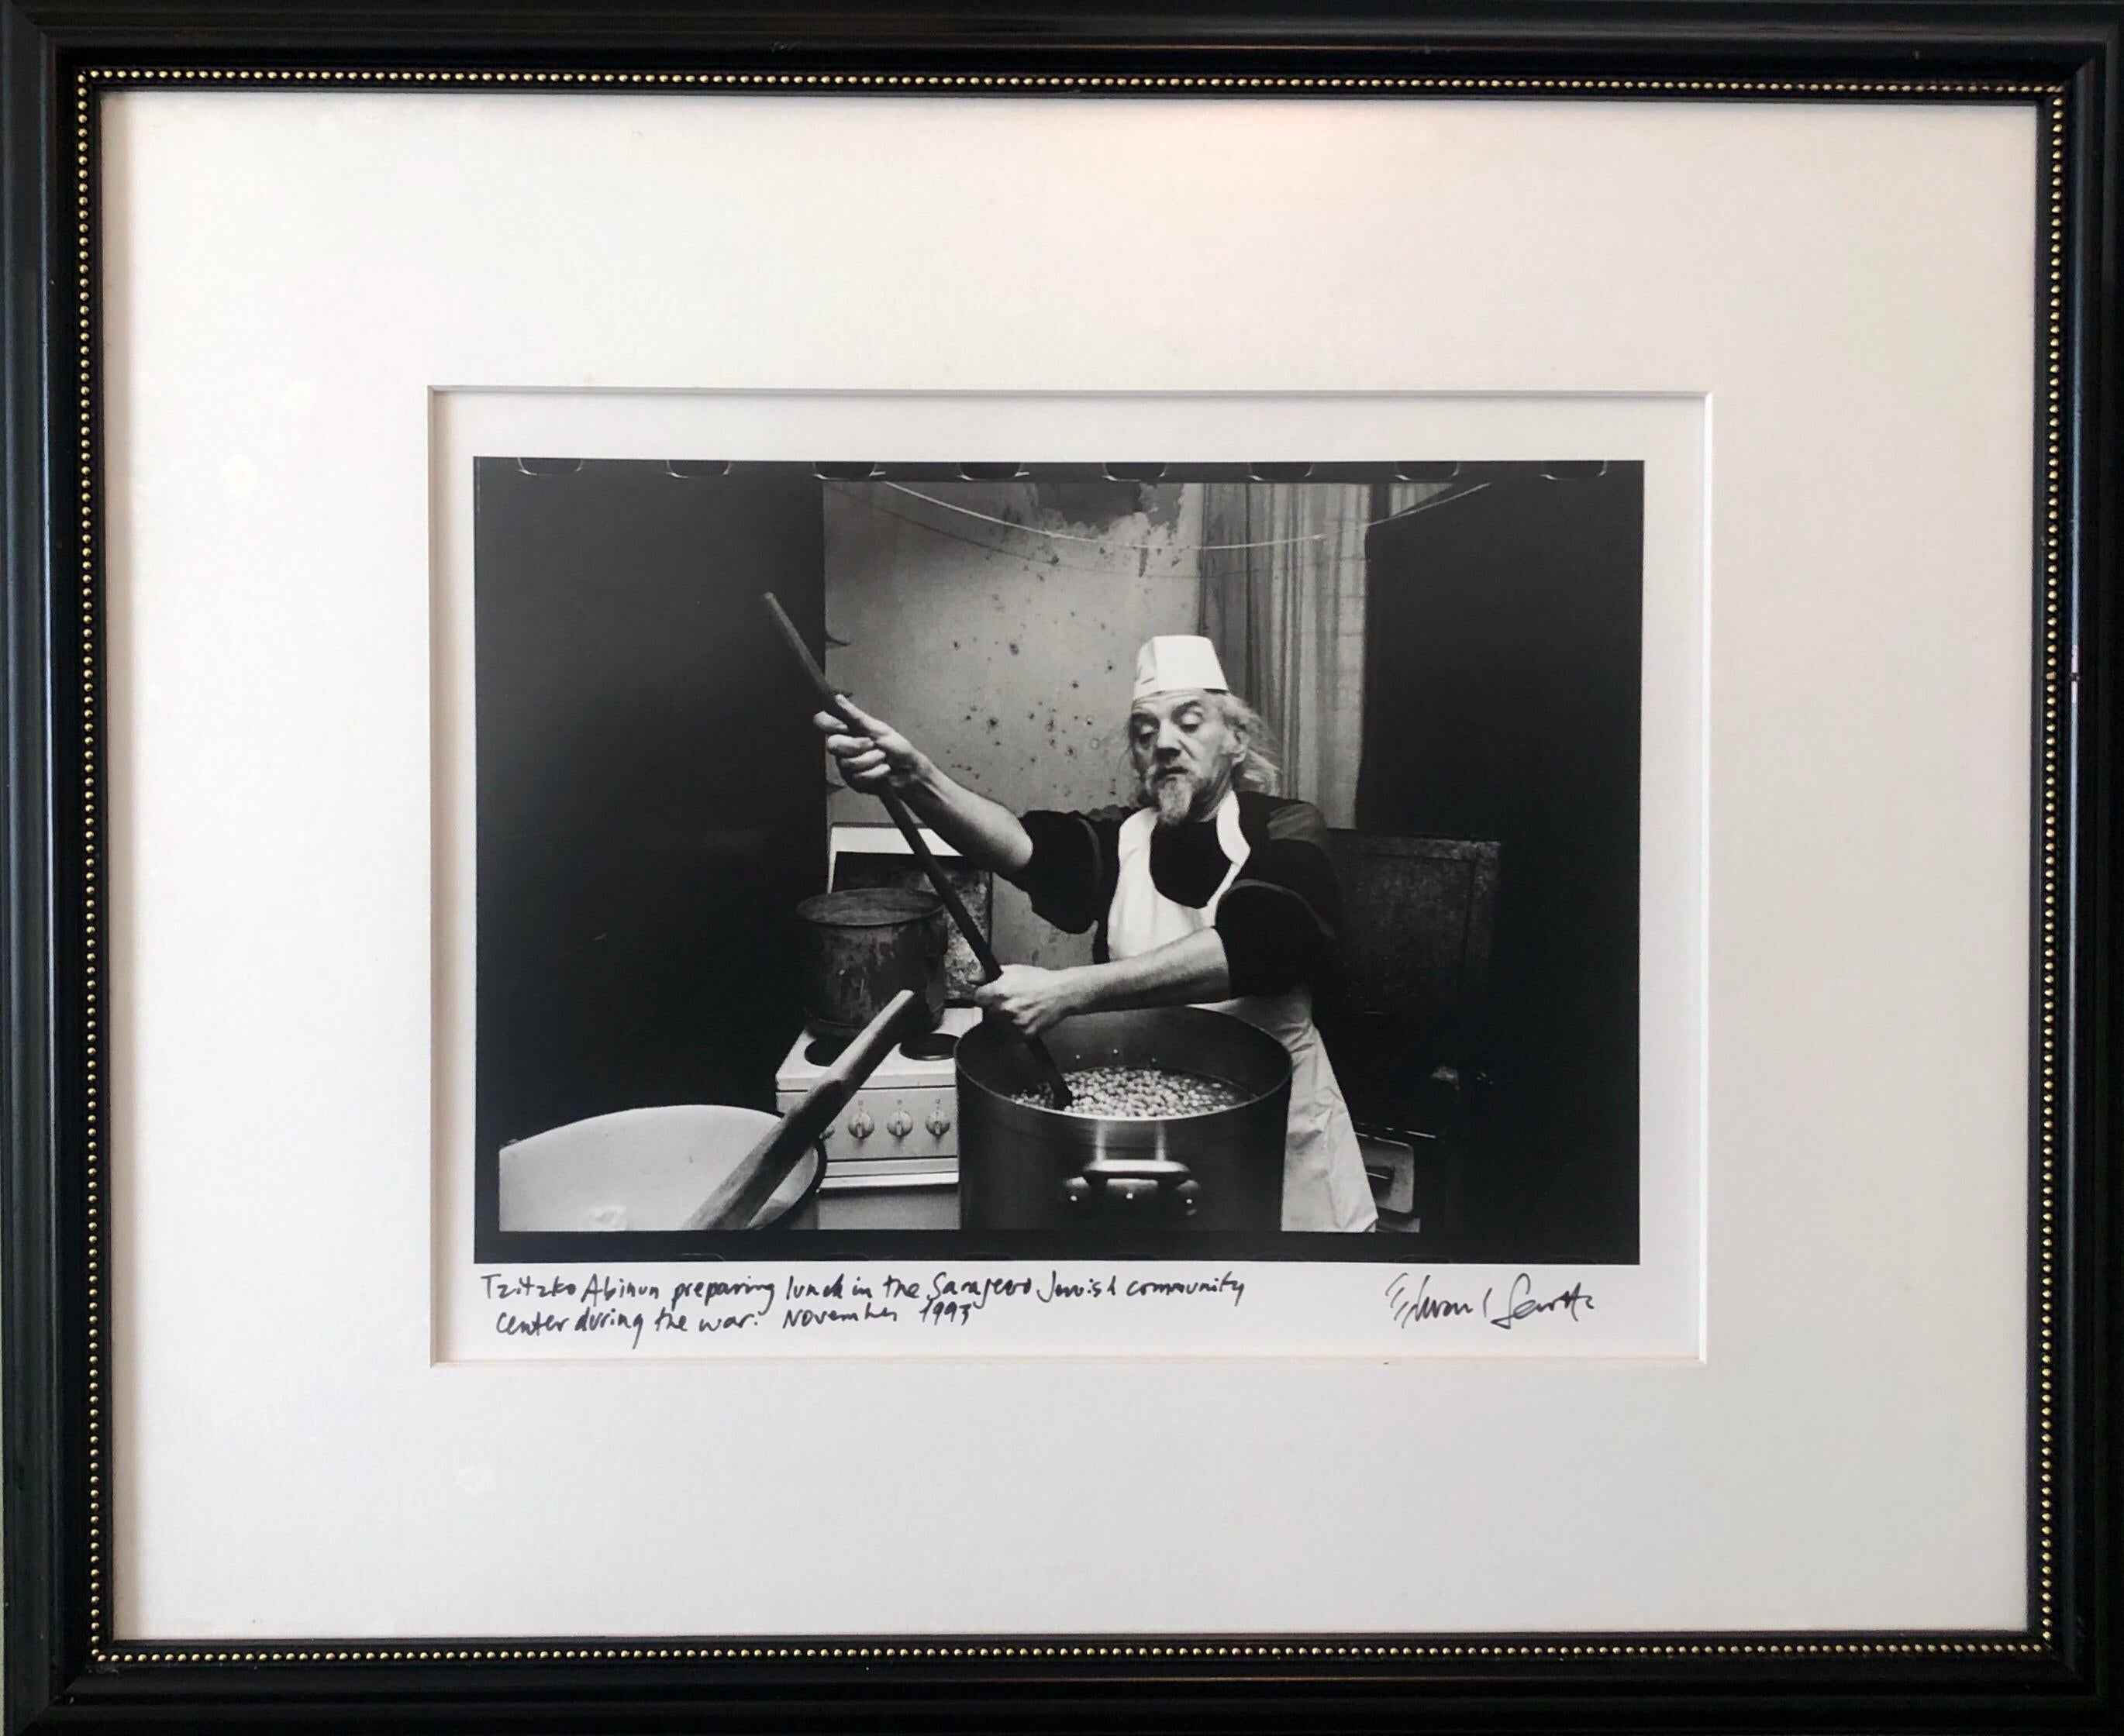 
Edward Serotta
Tzitzko Abinun (Man cooking) . Judaica. 	
 silver gelatin print, matted, captioned by hand and hand signed and numbered. B/W photographs documenting Jewish life in Eastern and Central Europe. 
Edward Serotta is a journalist,